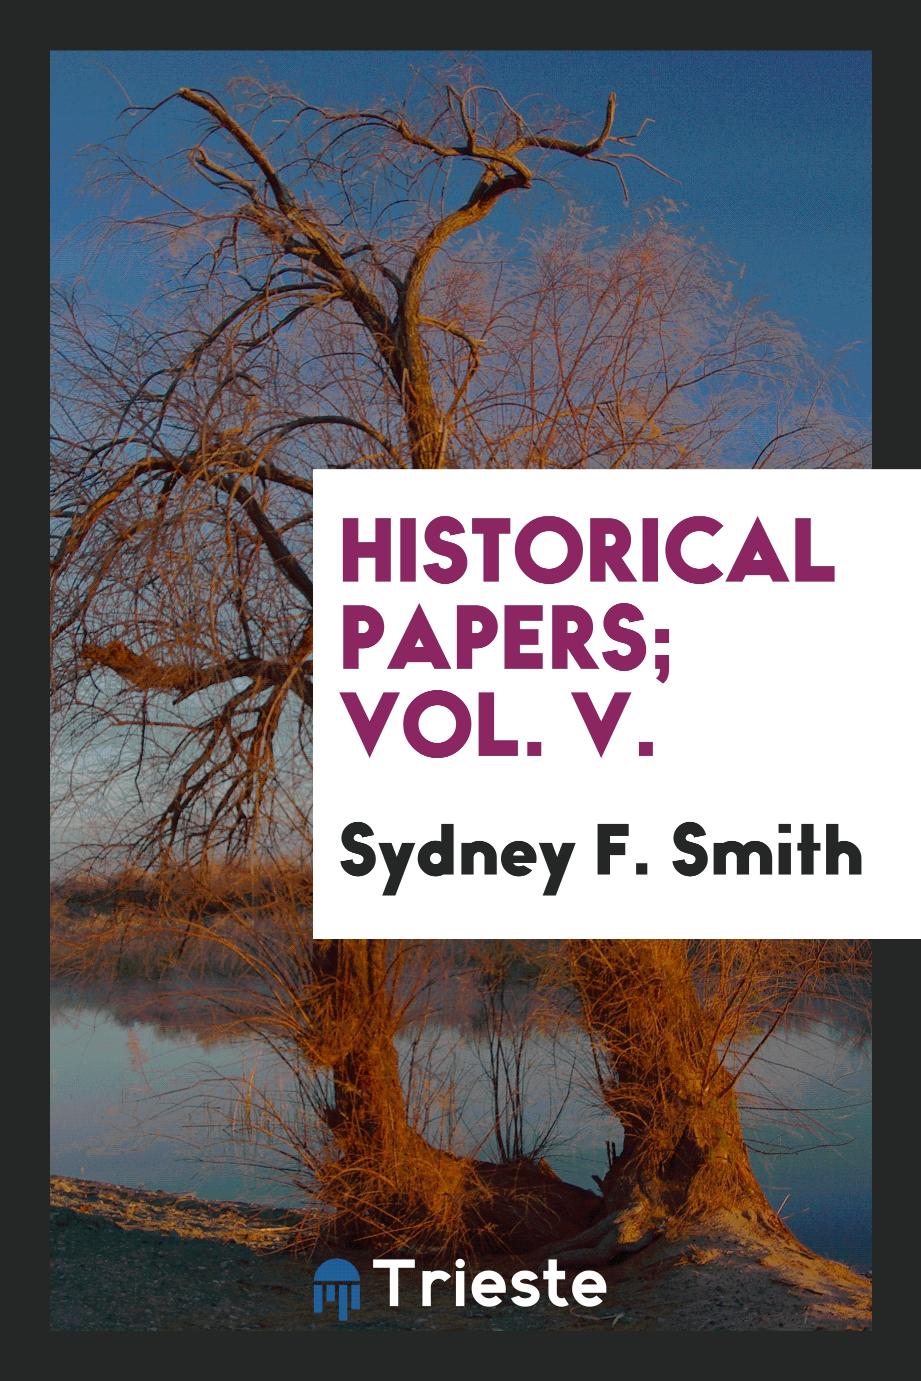 Historical papers; Vol. V.